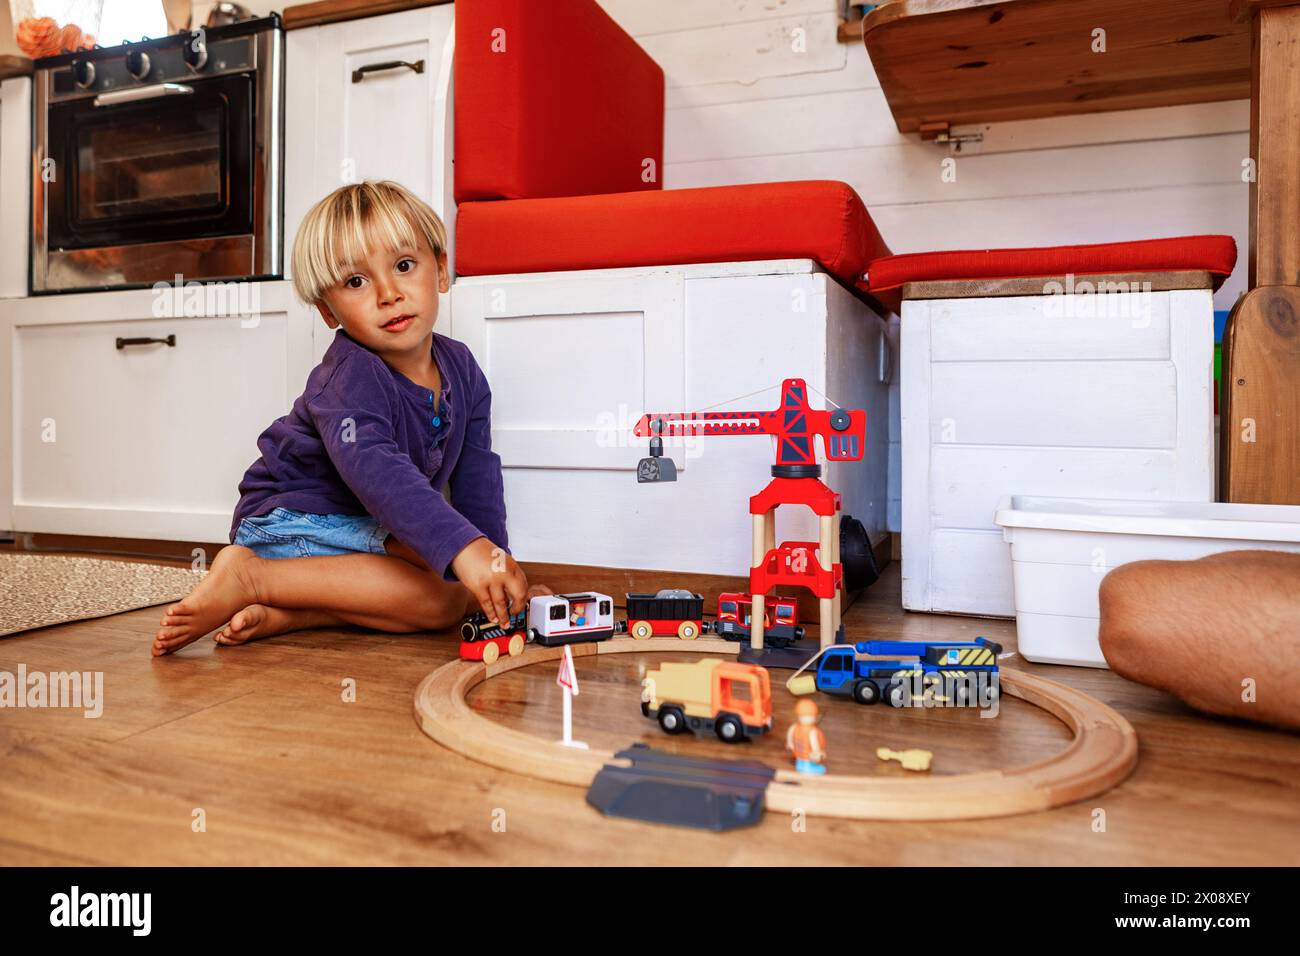 A young child plays with toys inside the cozy interior of a van, showcasing a family's customized tiny home on wheels, complete with living amenities. Stock Photo